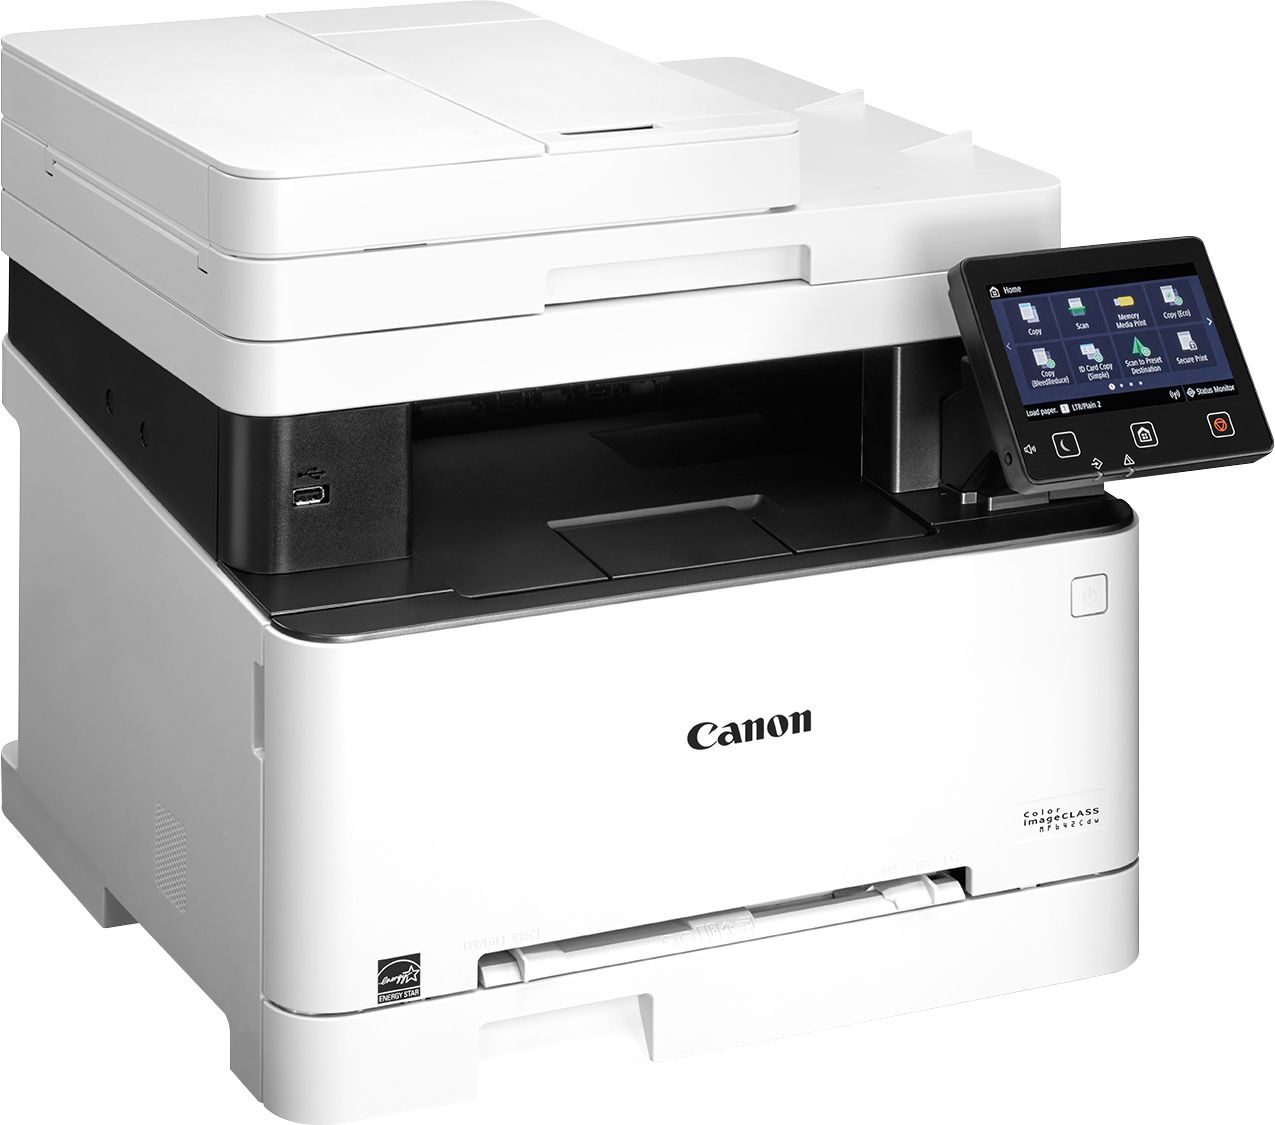 Angle View: Canon - Refurbished imageCLASS MF642Cdw Wireless Color All-In-One Laser Printer - White